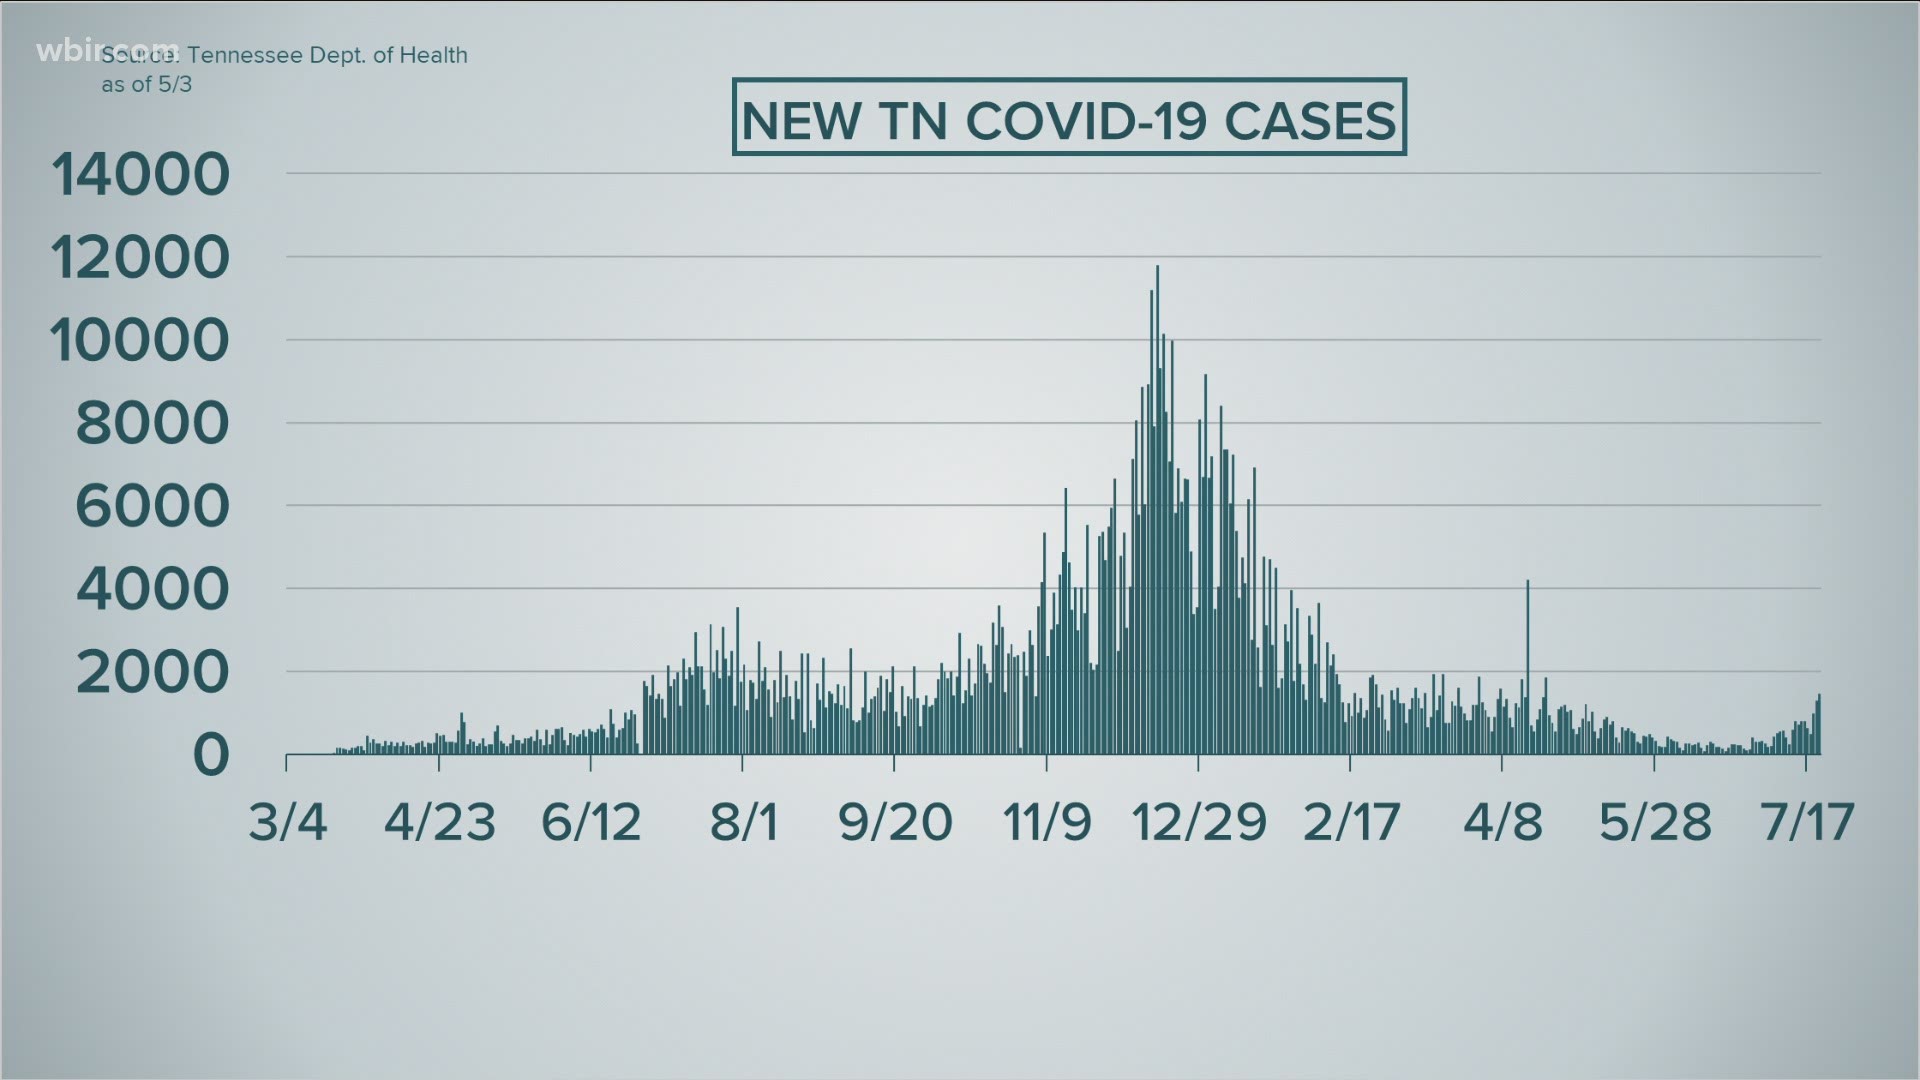 For the first time since May, Tennessee has more than 1,000 new cases. Although numbers are going up, they're not at the same level they were last year.